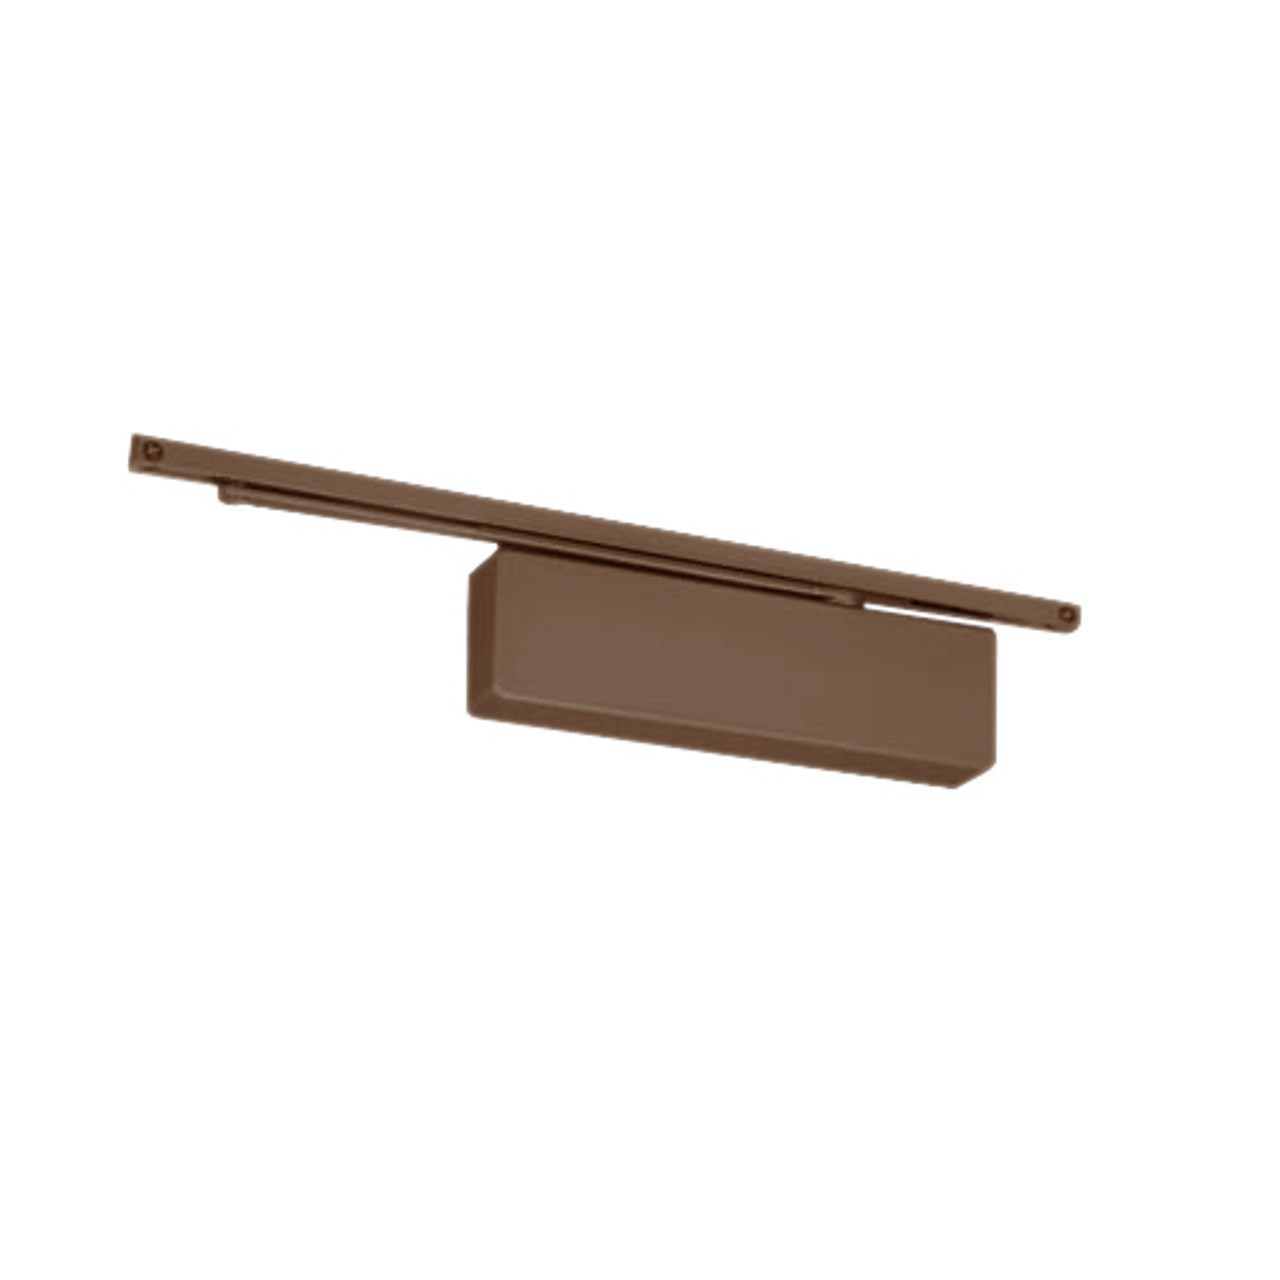 7570ST-691-LH Norton 7570 Series Security Door Closer with Pull Side Slide Track Arm in Dull Bronze Finish